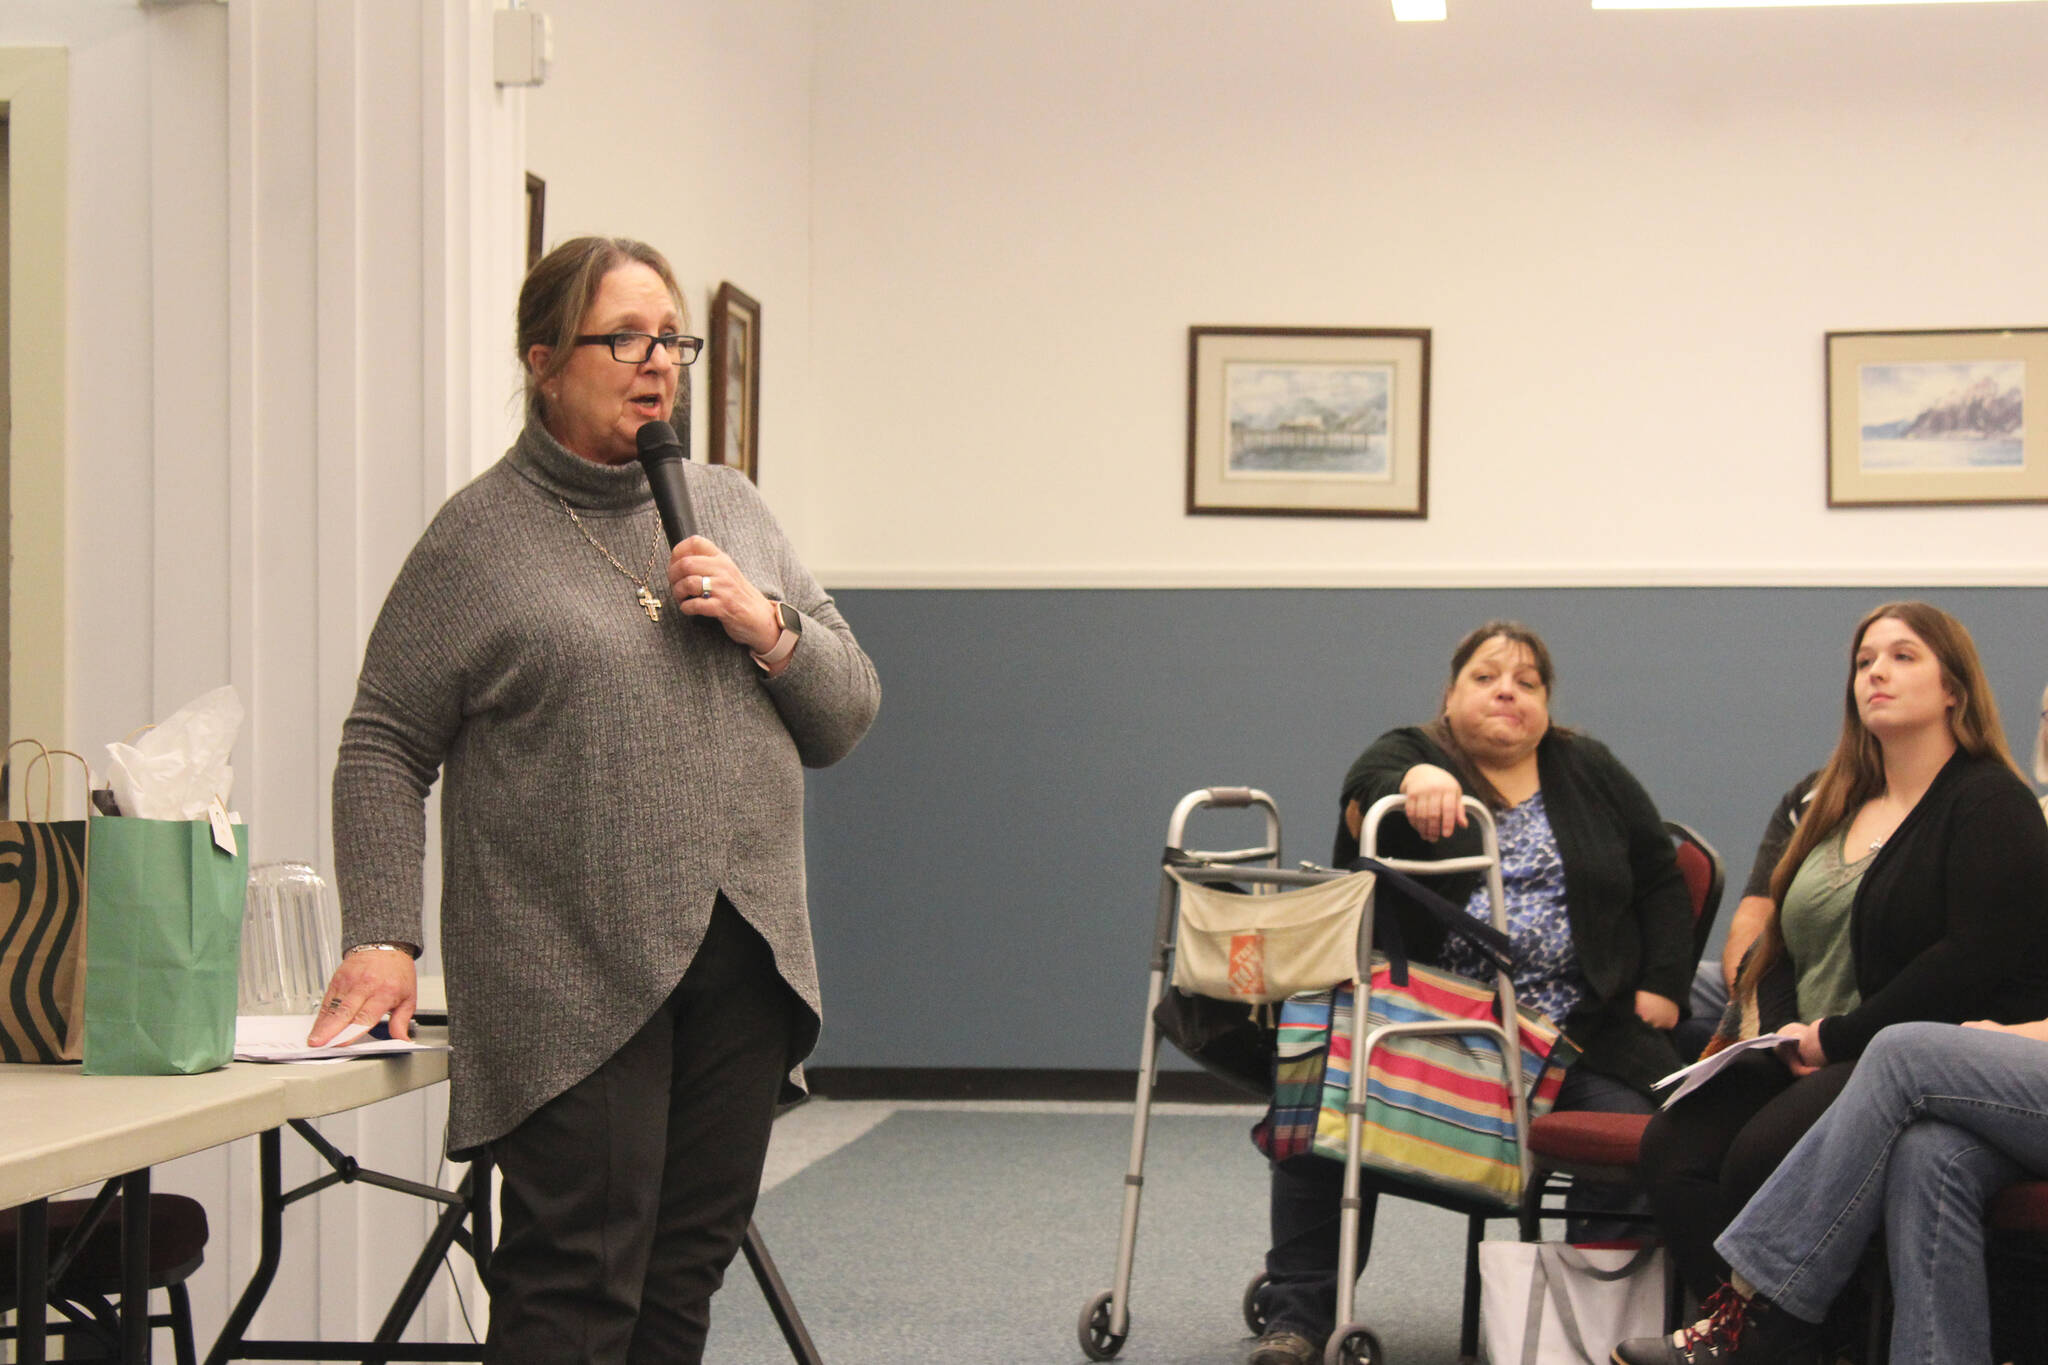 Love INC of the Kenai Peninsula Executive Director Leslie Rohr fields questions from community members during a town hall to discuss a cold weather shelter in Nikiski on Wednesday, Dec. 15, 2021 in Nikiski, Alaska. (Ashlyn O’Hara/Peninsula Clarion)